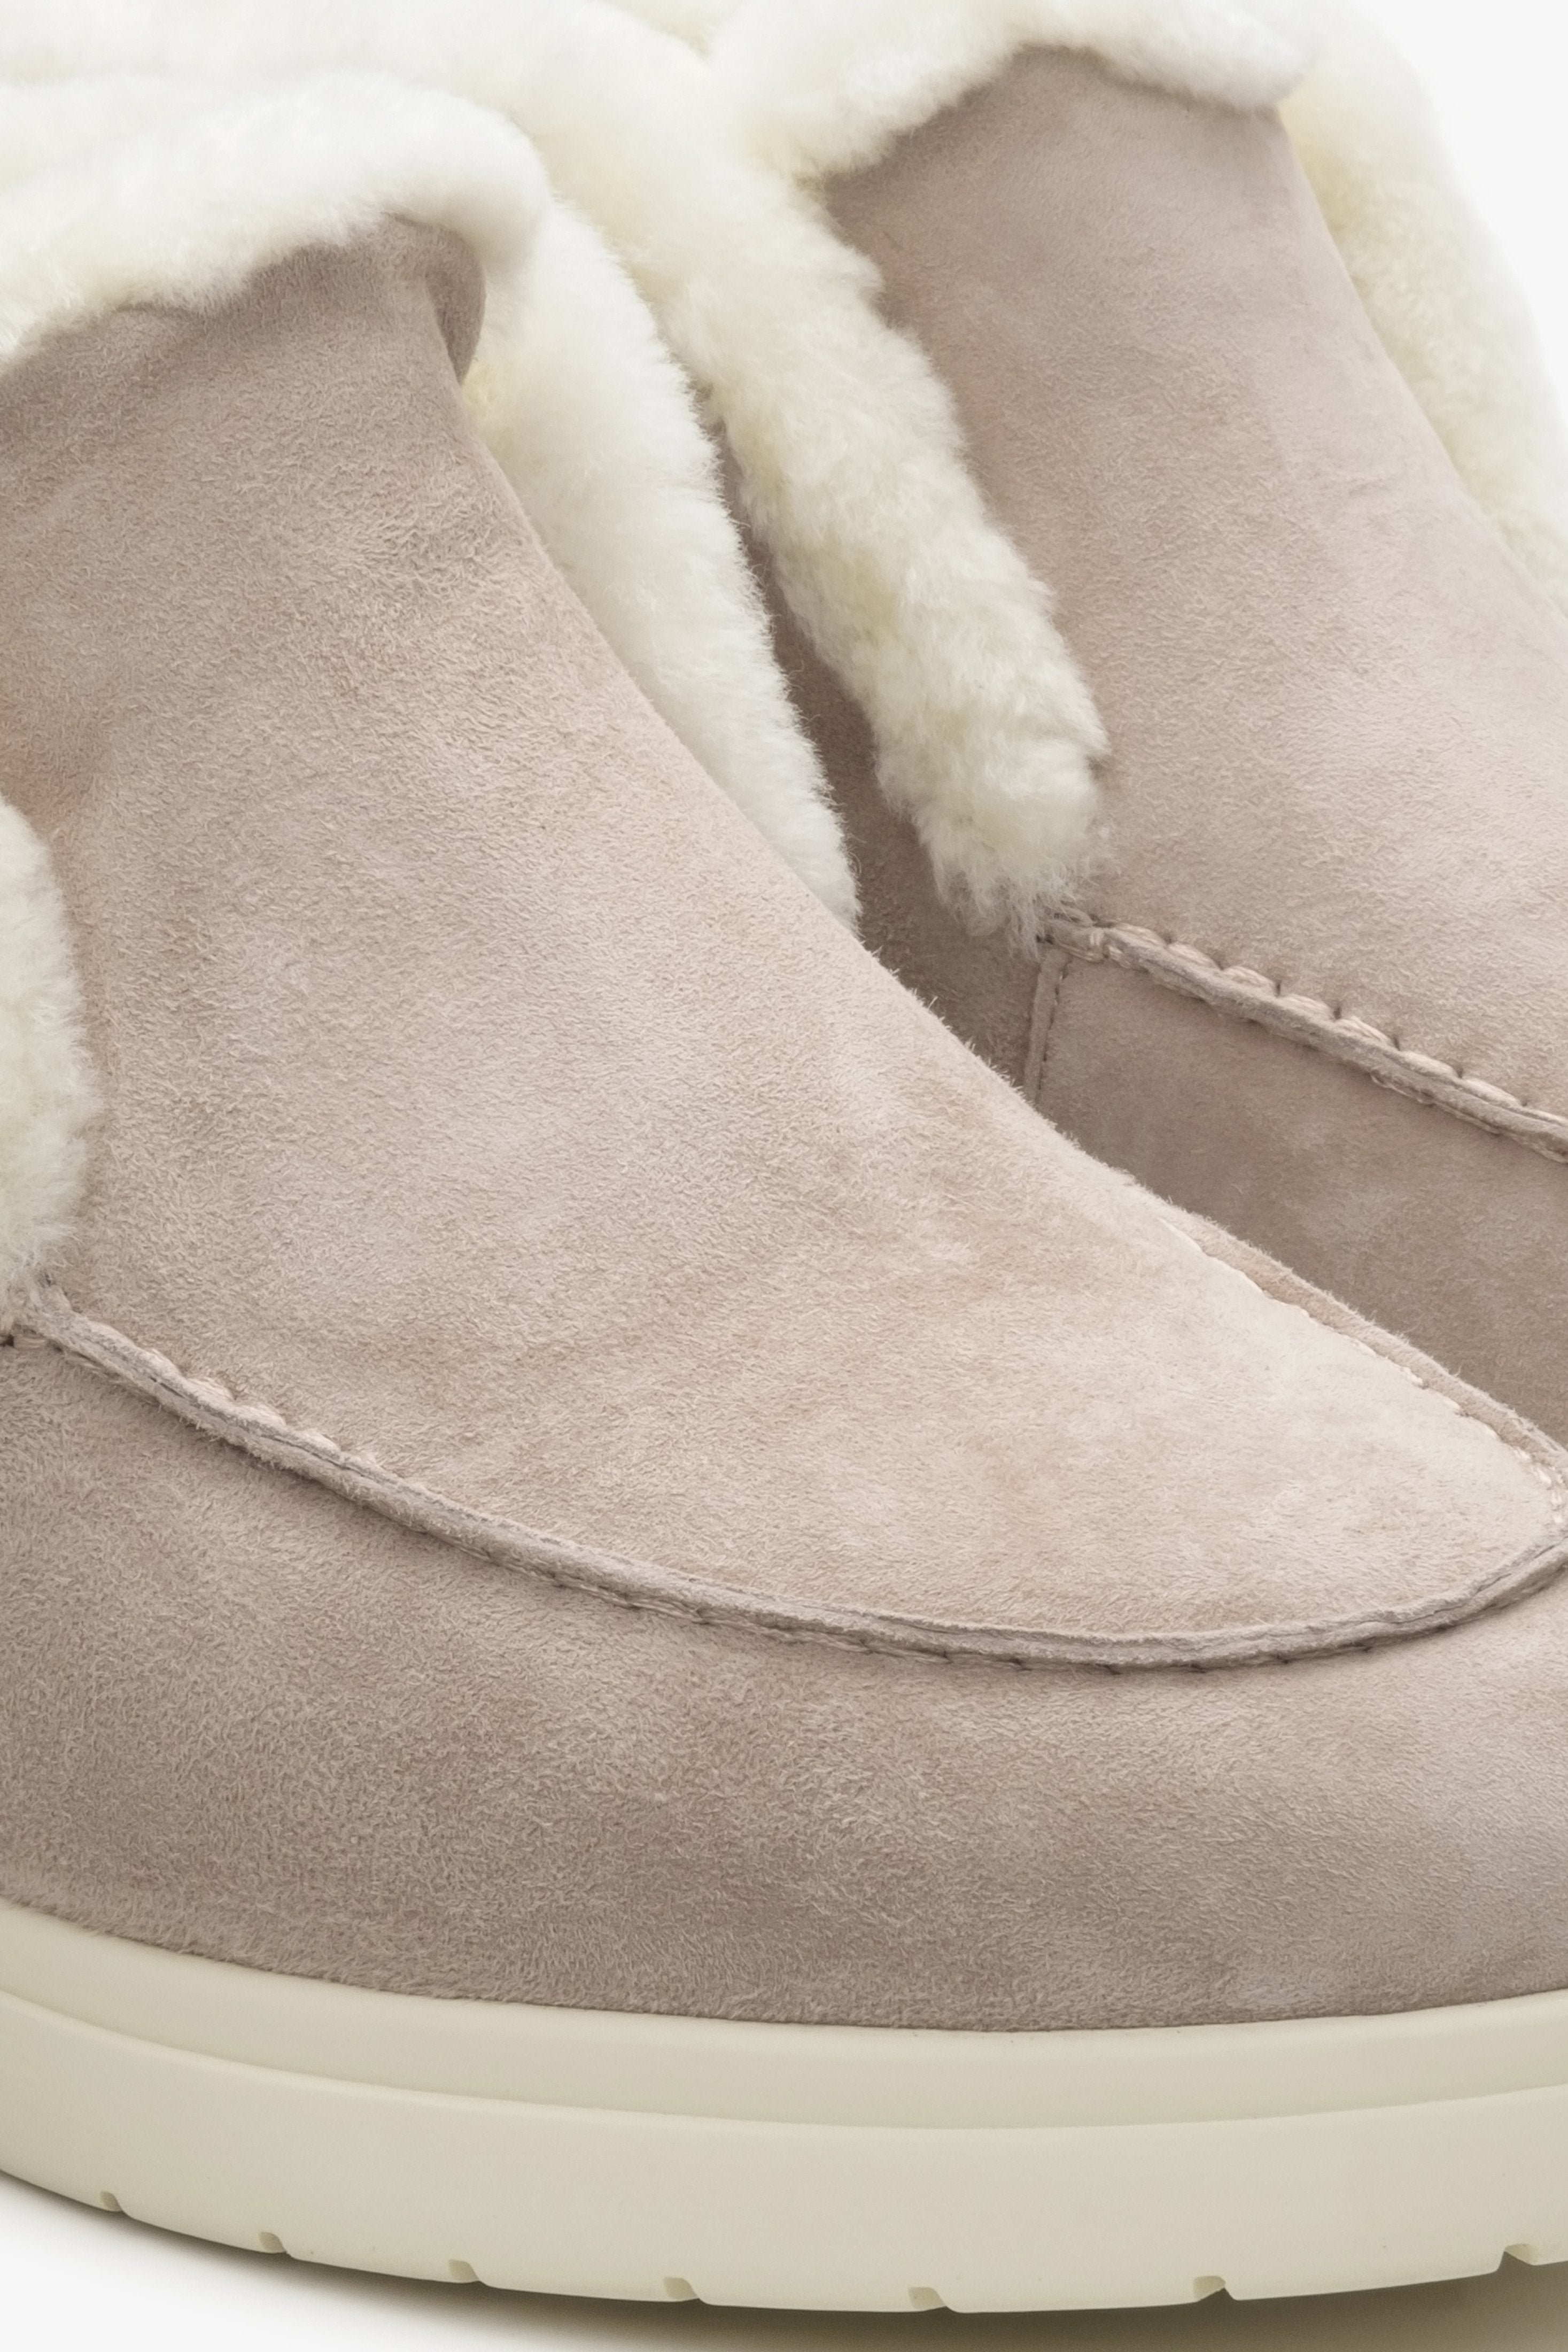 Women's fur and velour ankle boots in pale pink colour.